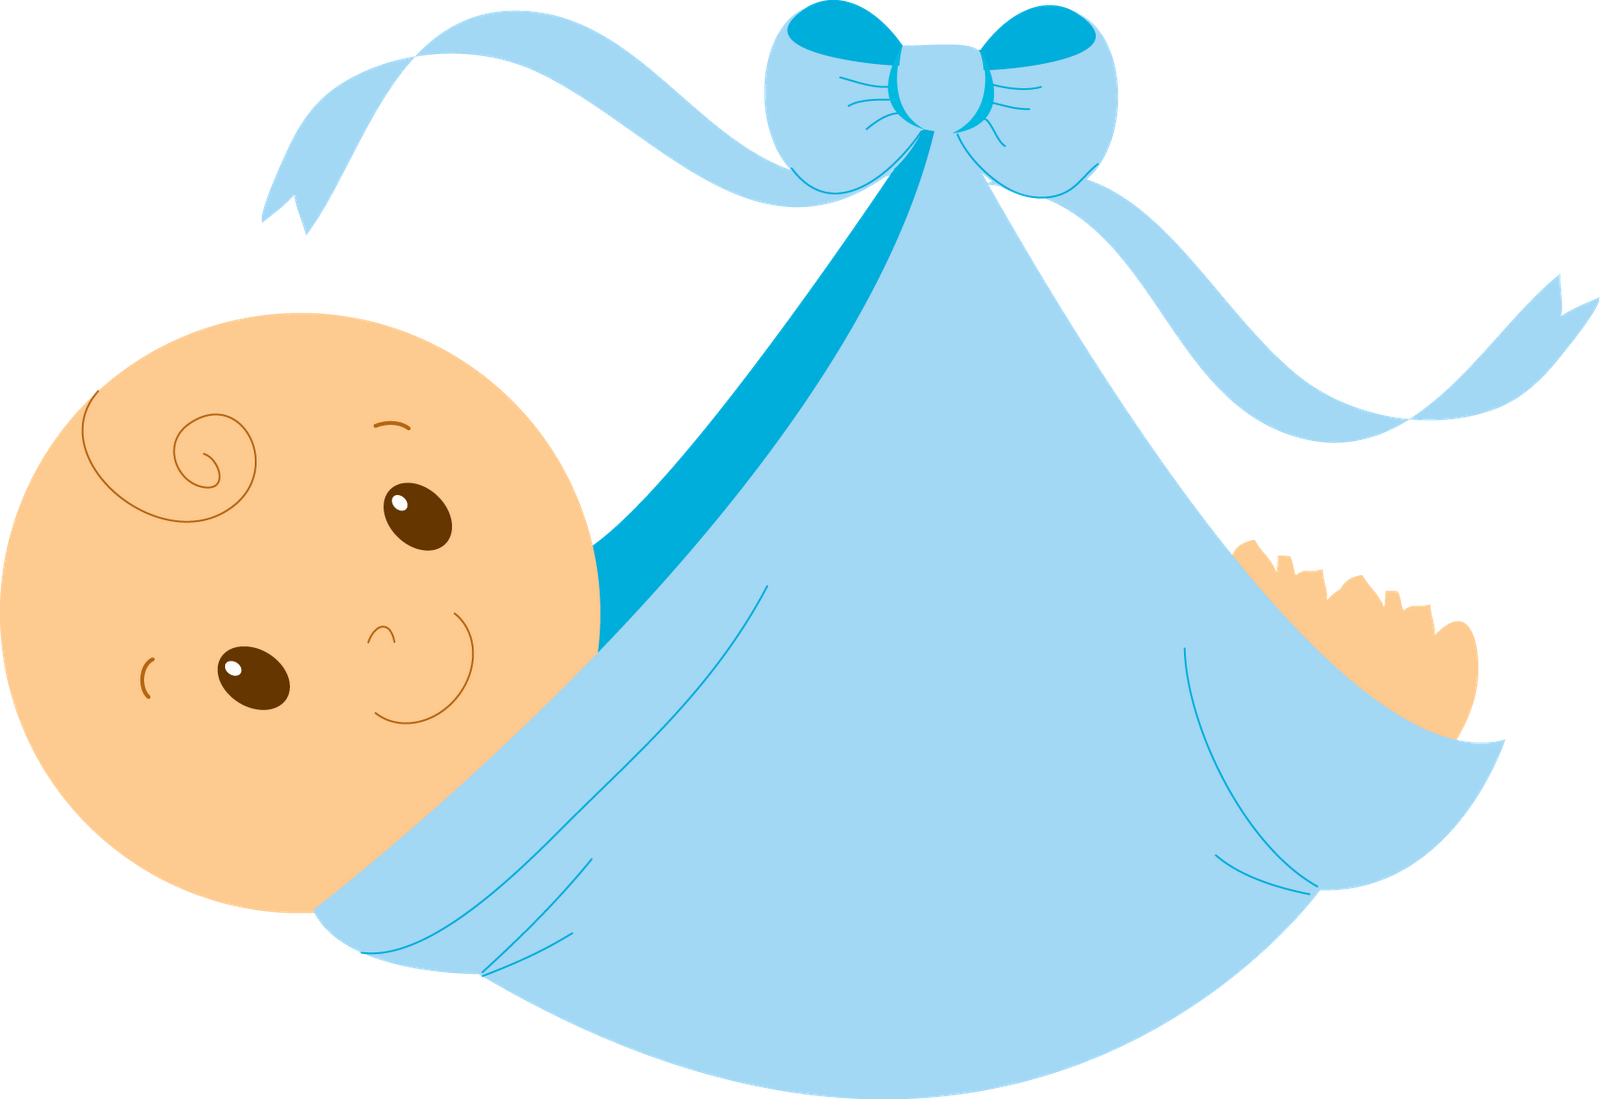 Baby feet image of baby border clipart 9 free clip art